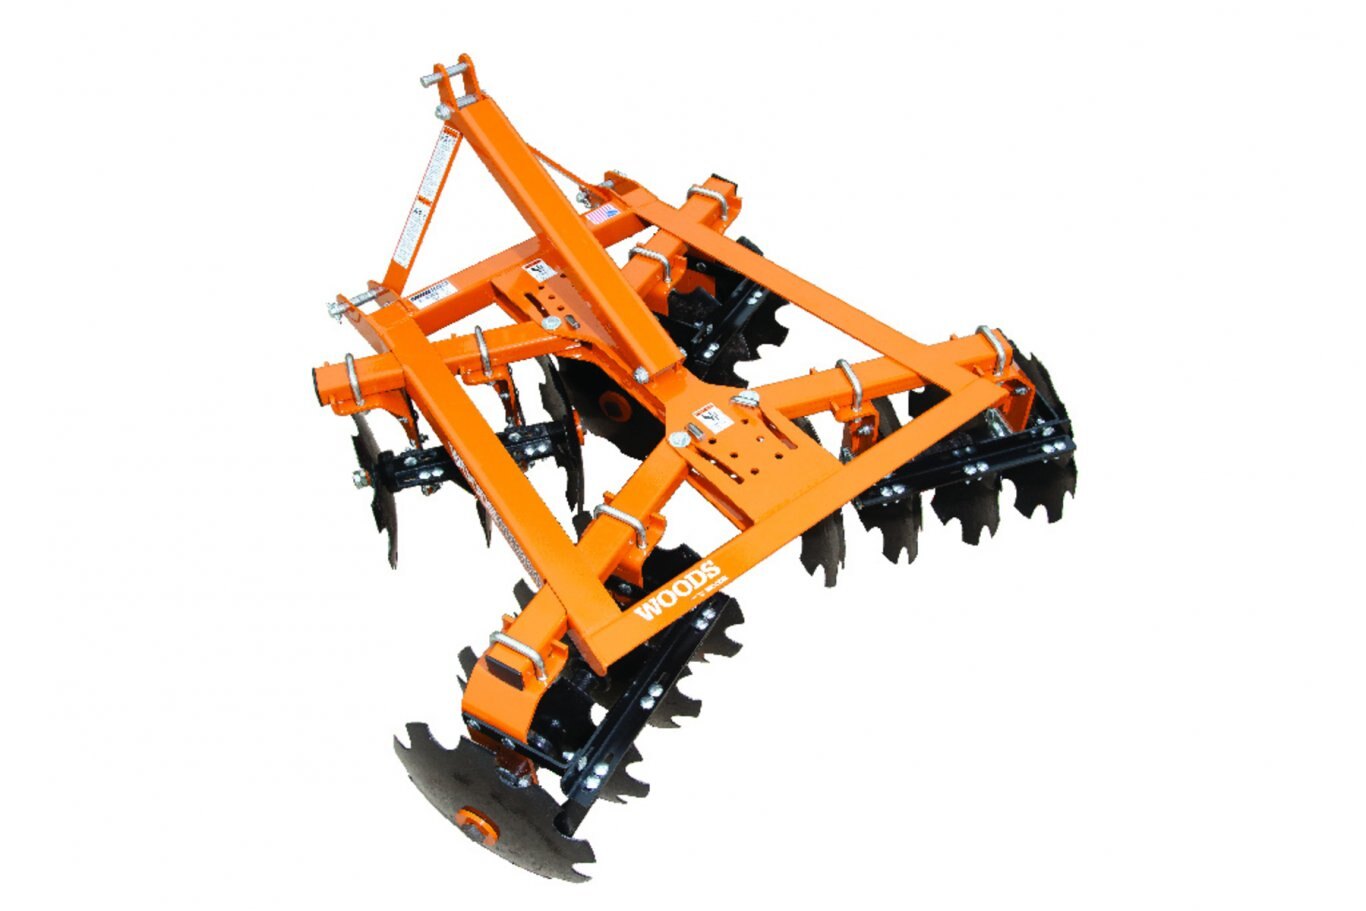 Woods Disc Harrows DHS48